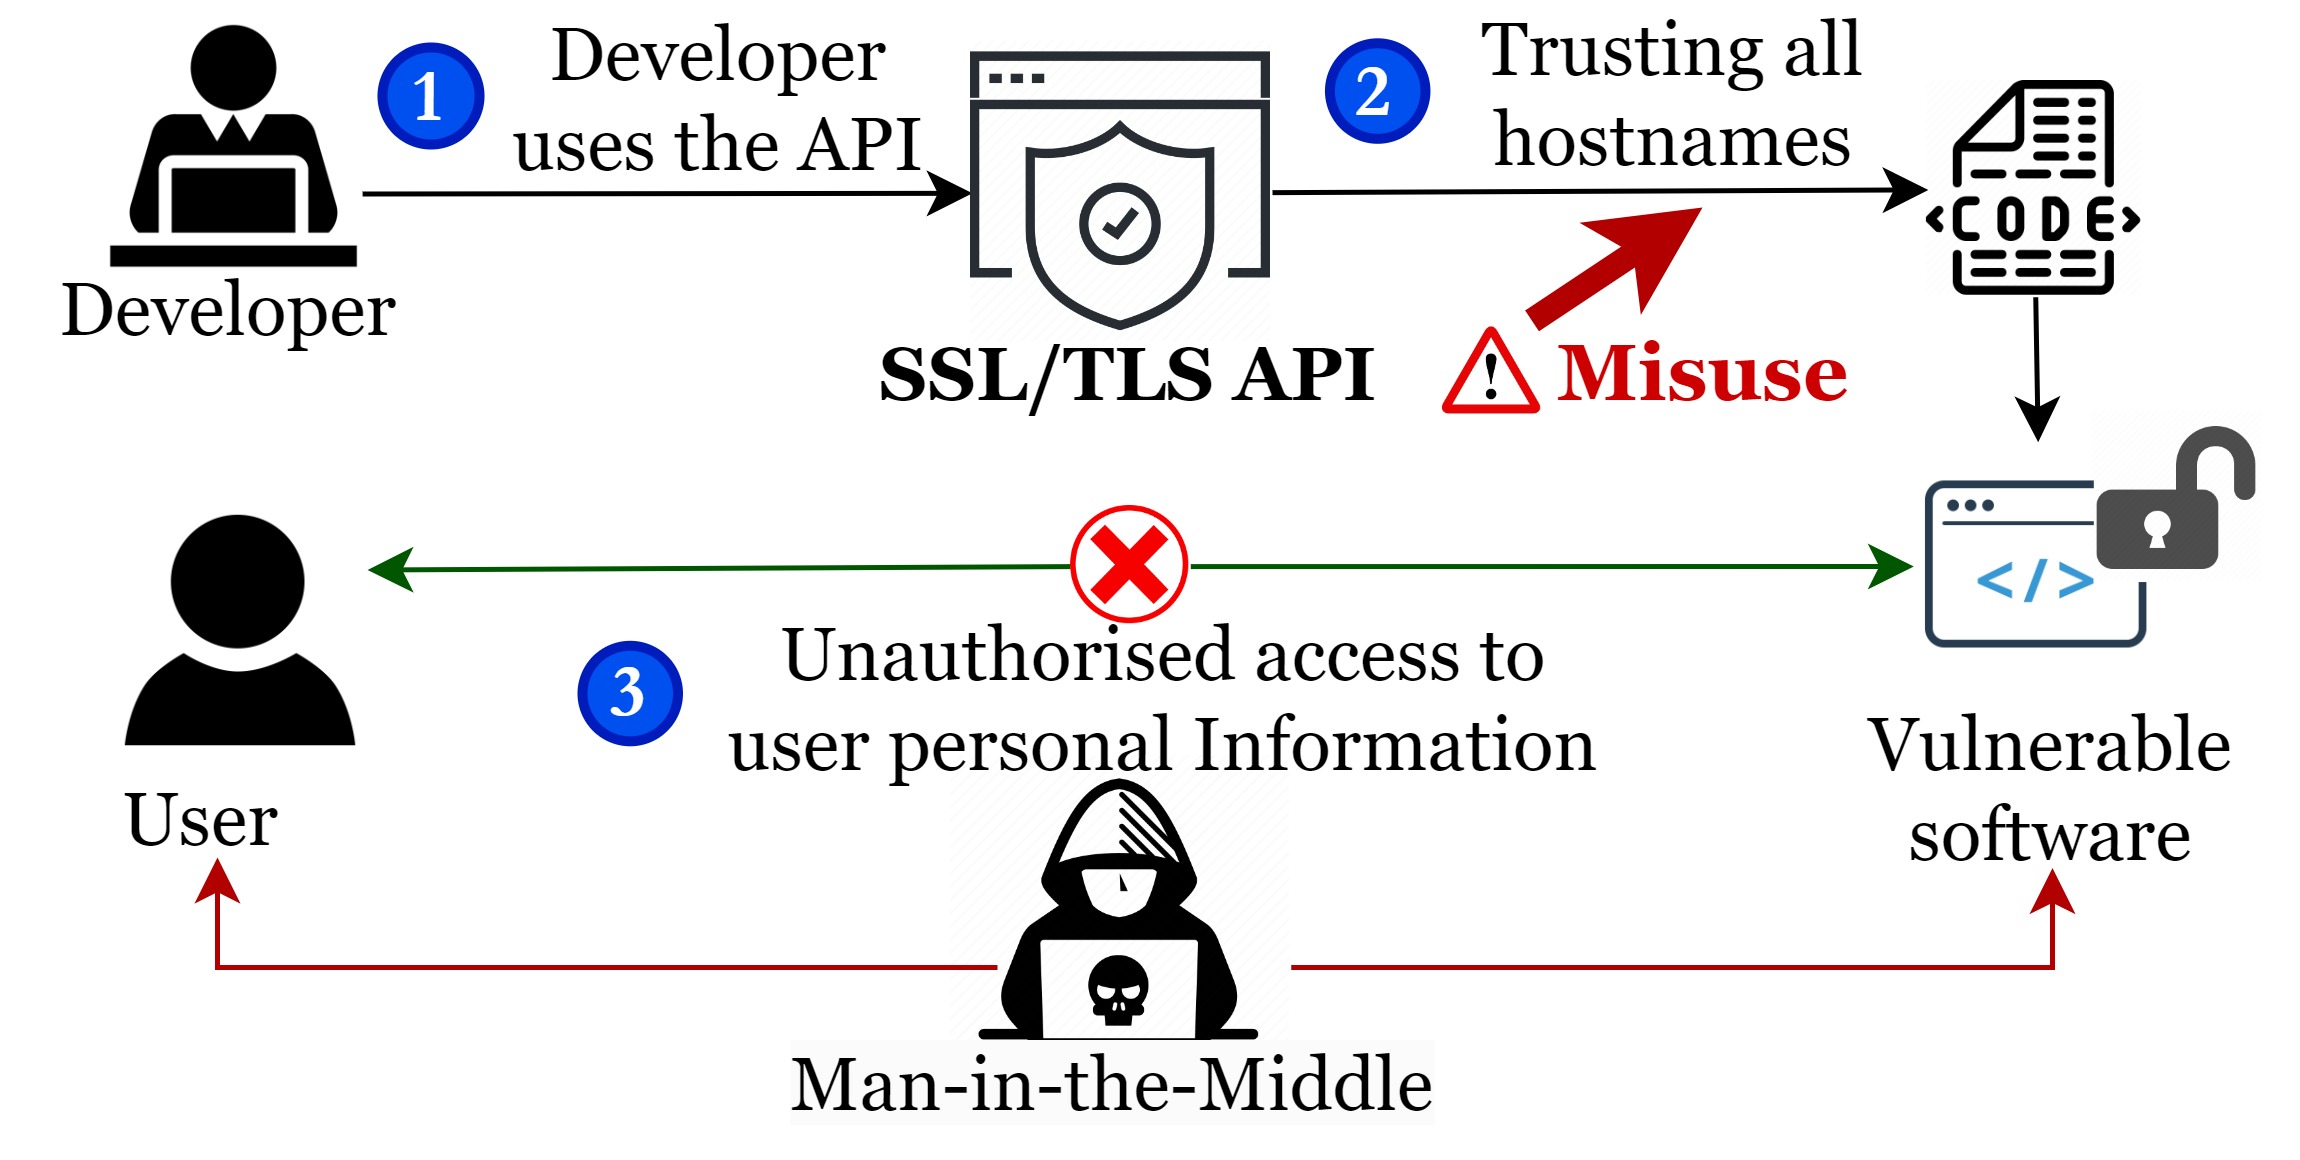 An Investigation into Misuse of Java Security APIs by Large Language Models